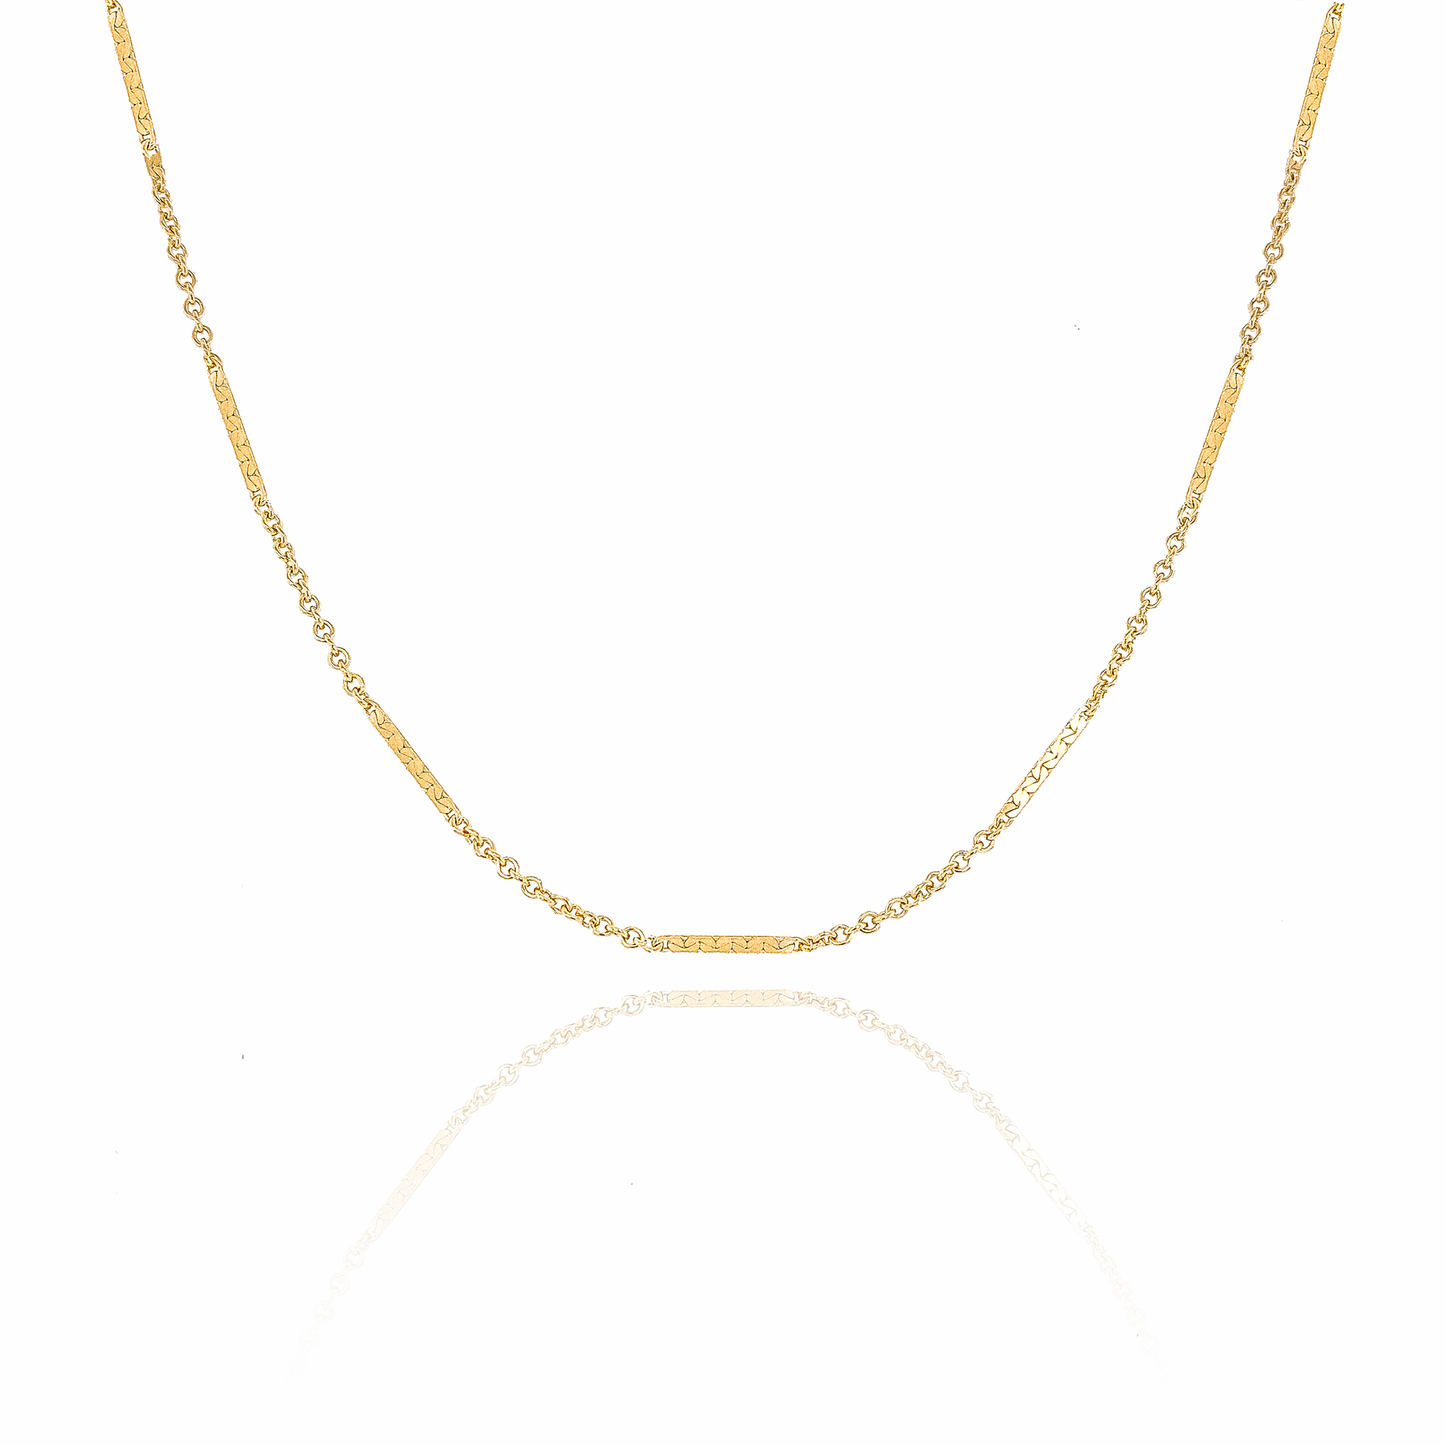 Kendal Shorty Necklace: Gold